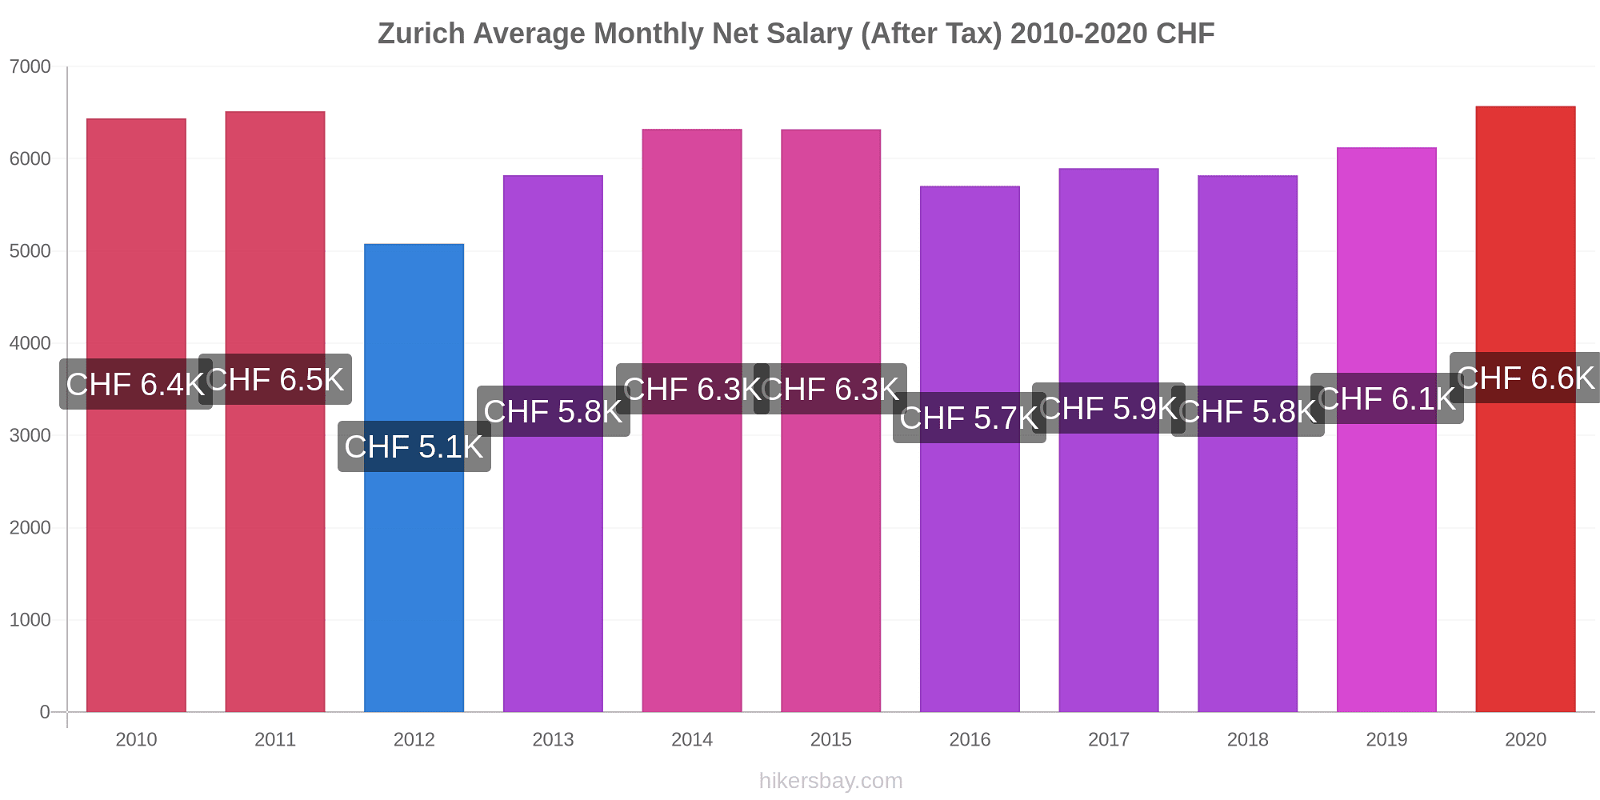 Zurich price changes Average Monthly Net Salary (After Tax) hikersbay.com